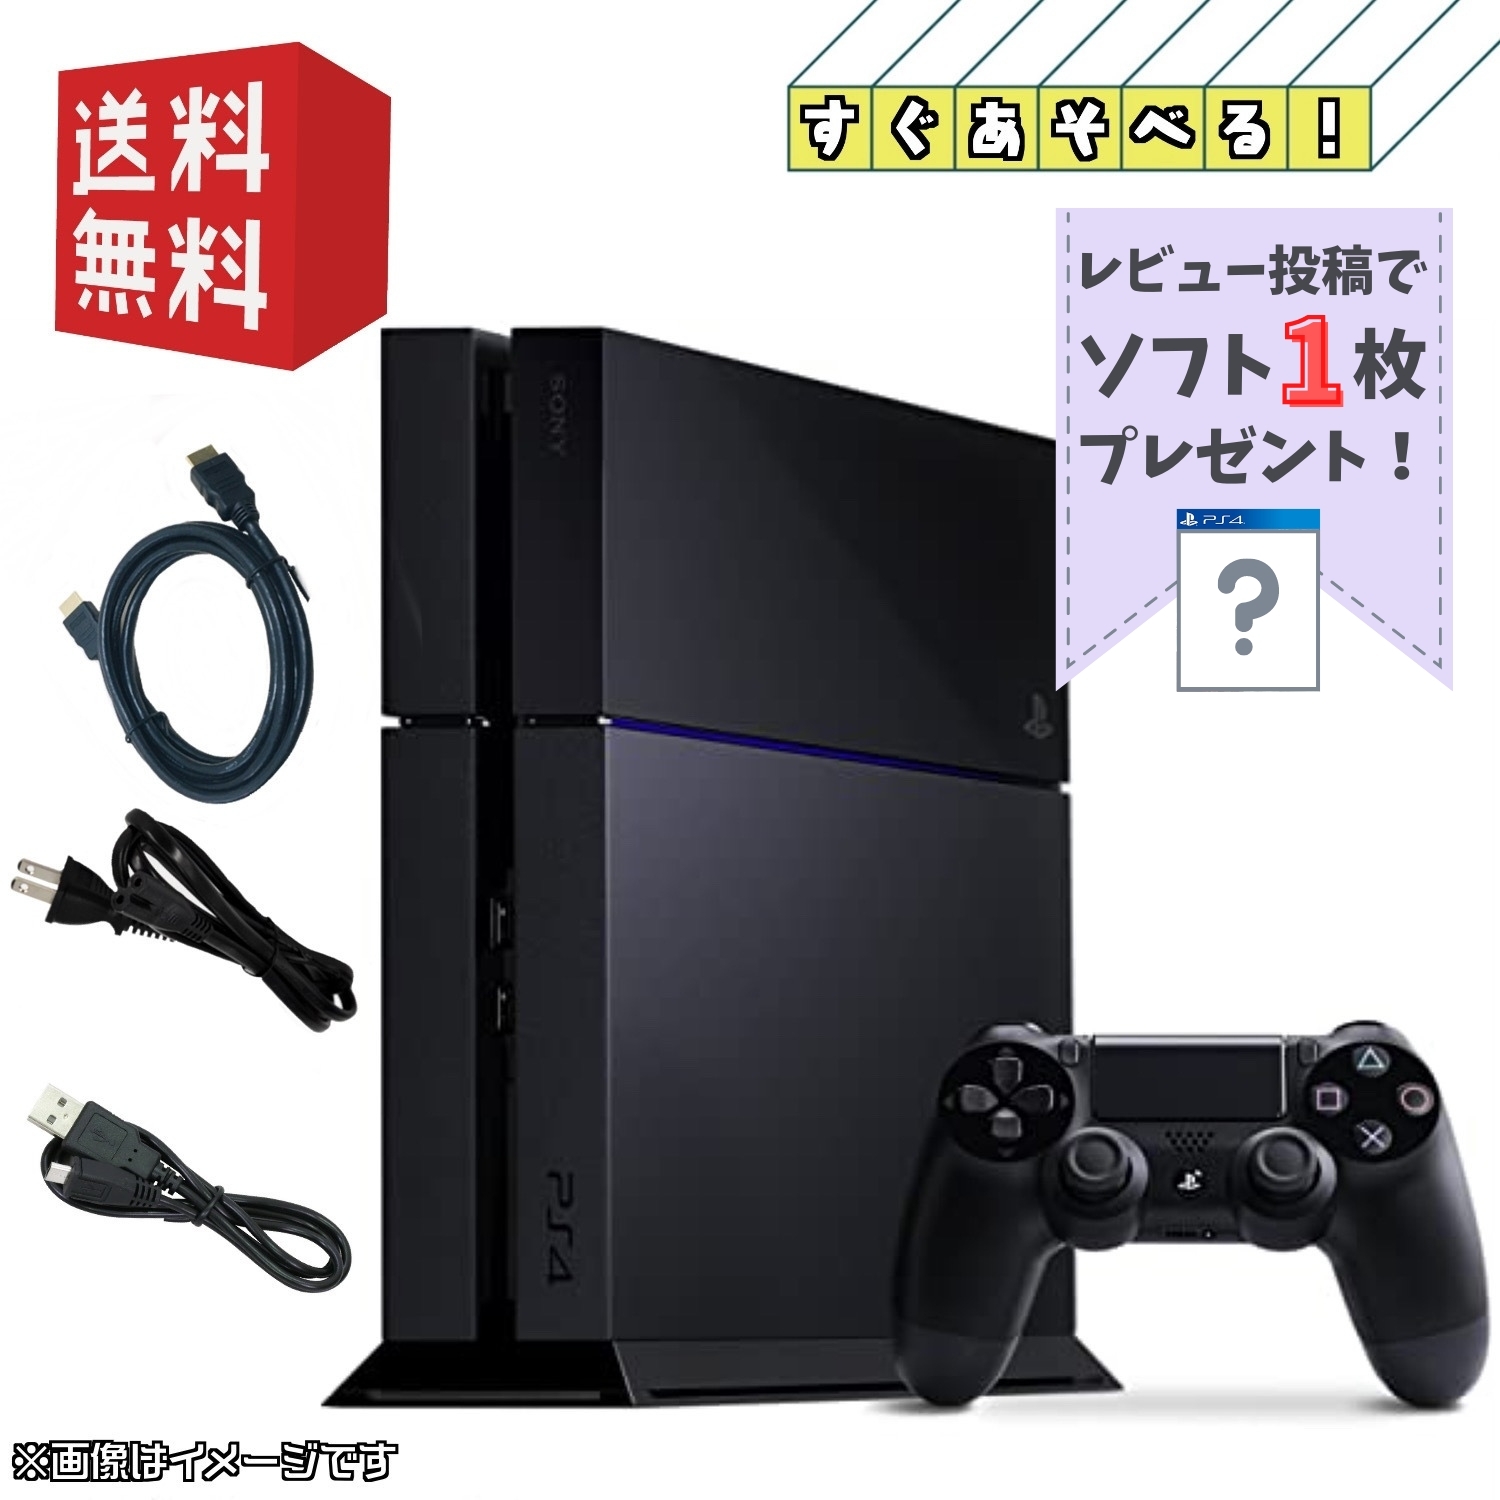 PS4 初期型 本体 ☆純正コントローラー☆500GB☆ ソフトプレゼント 